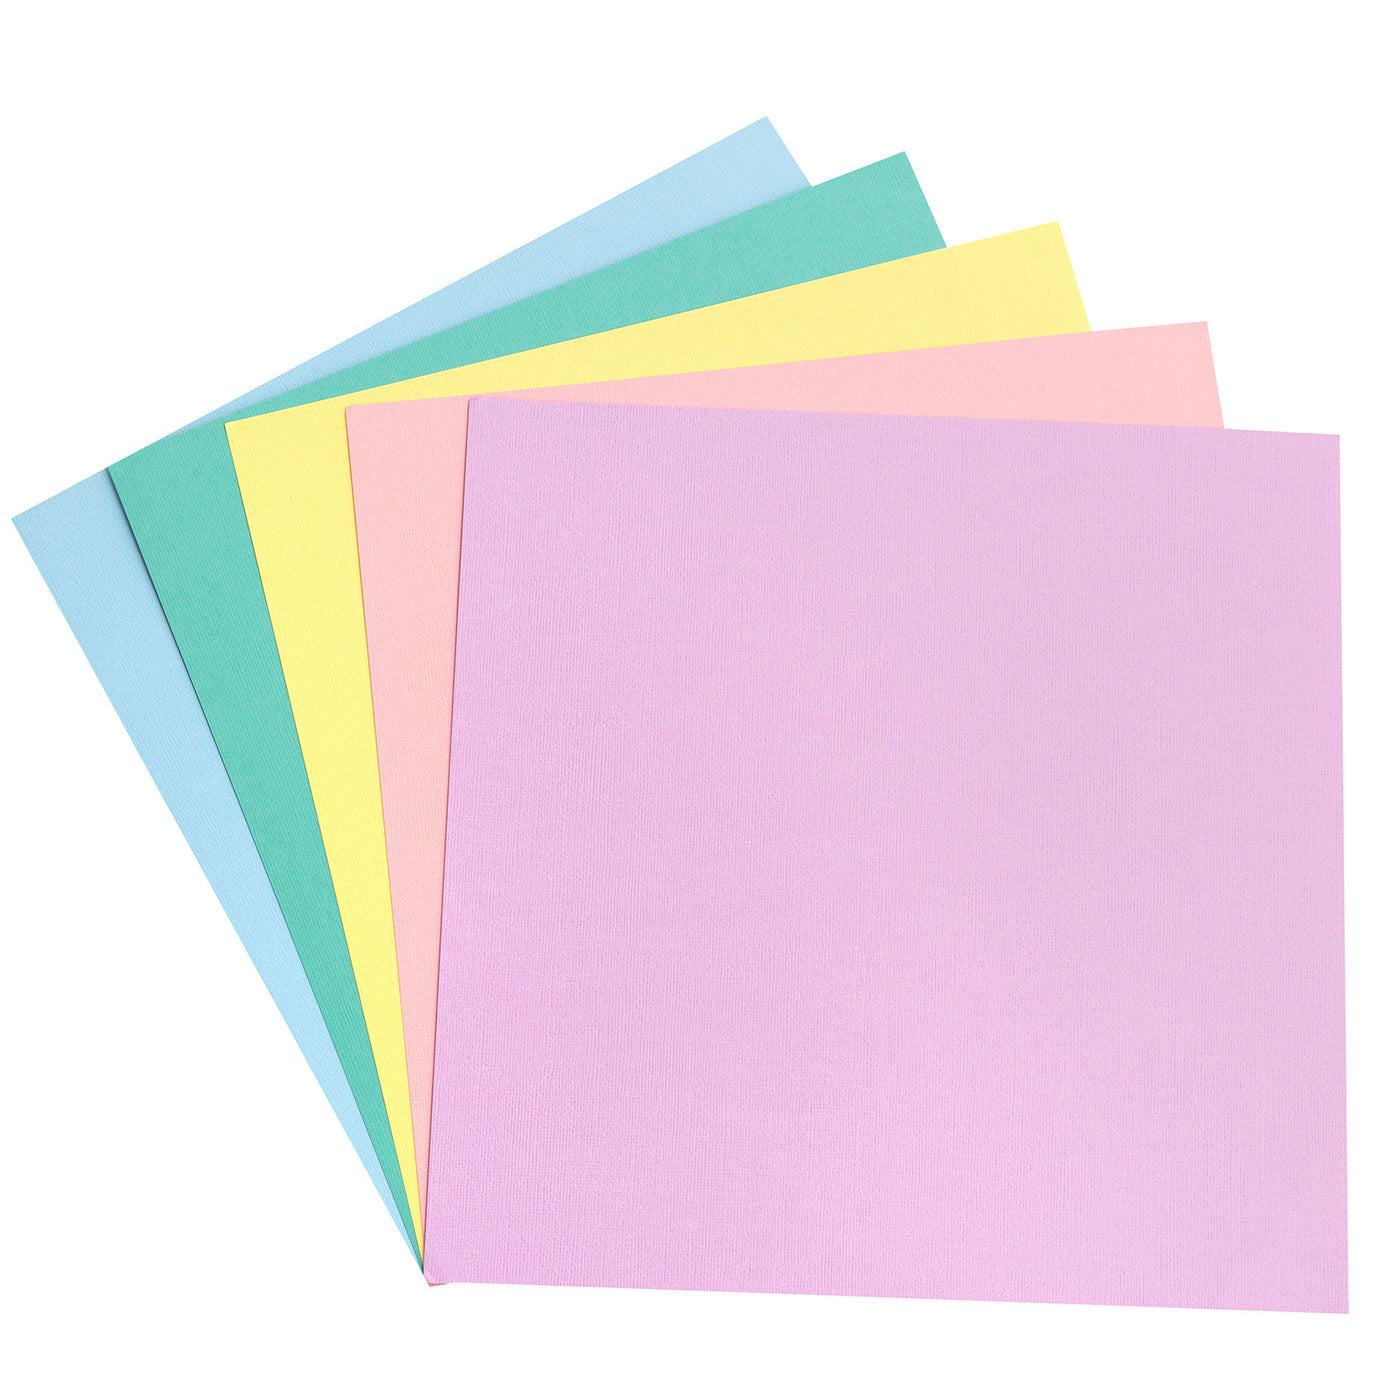 4 sheets each of 15 Pastel Cardstock colors